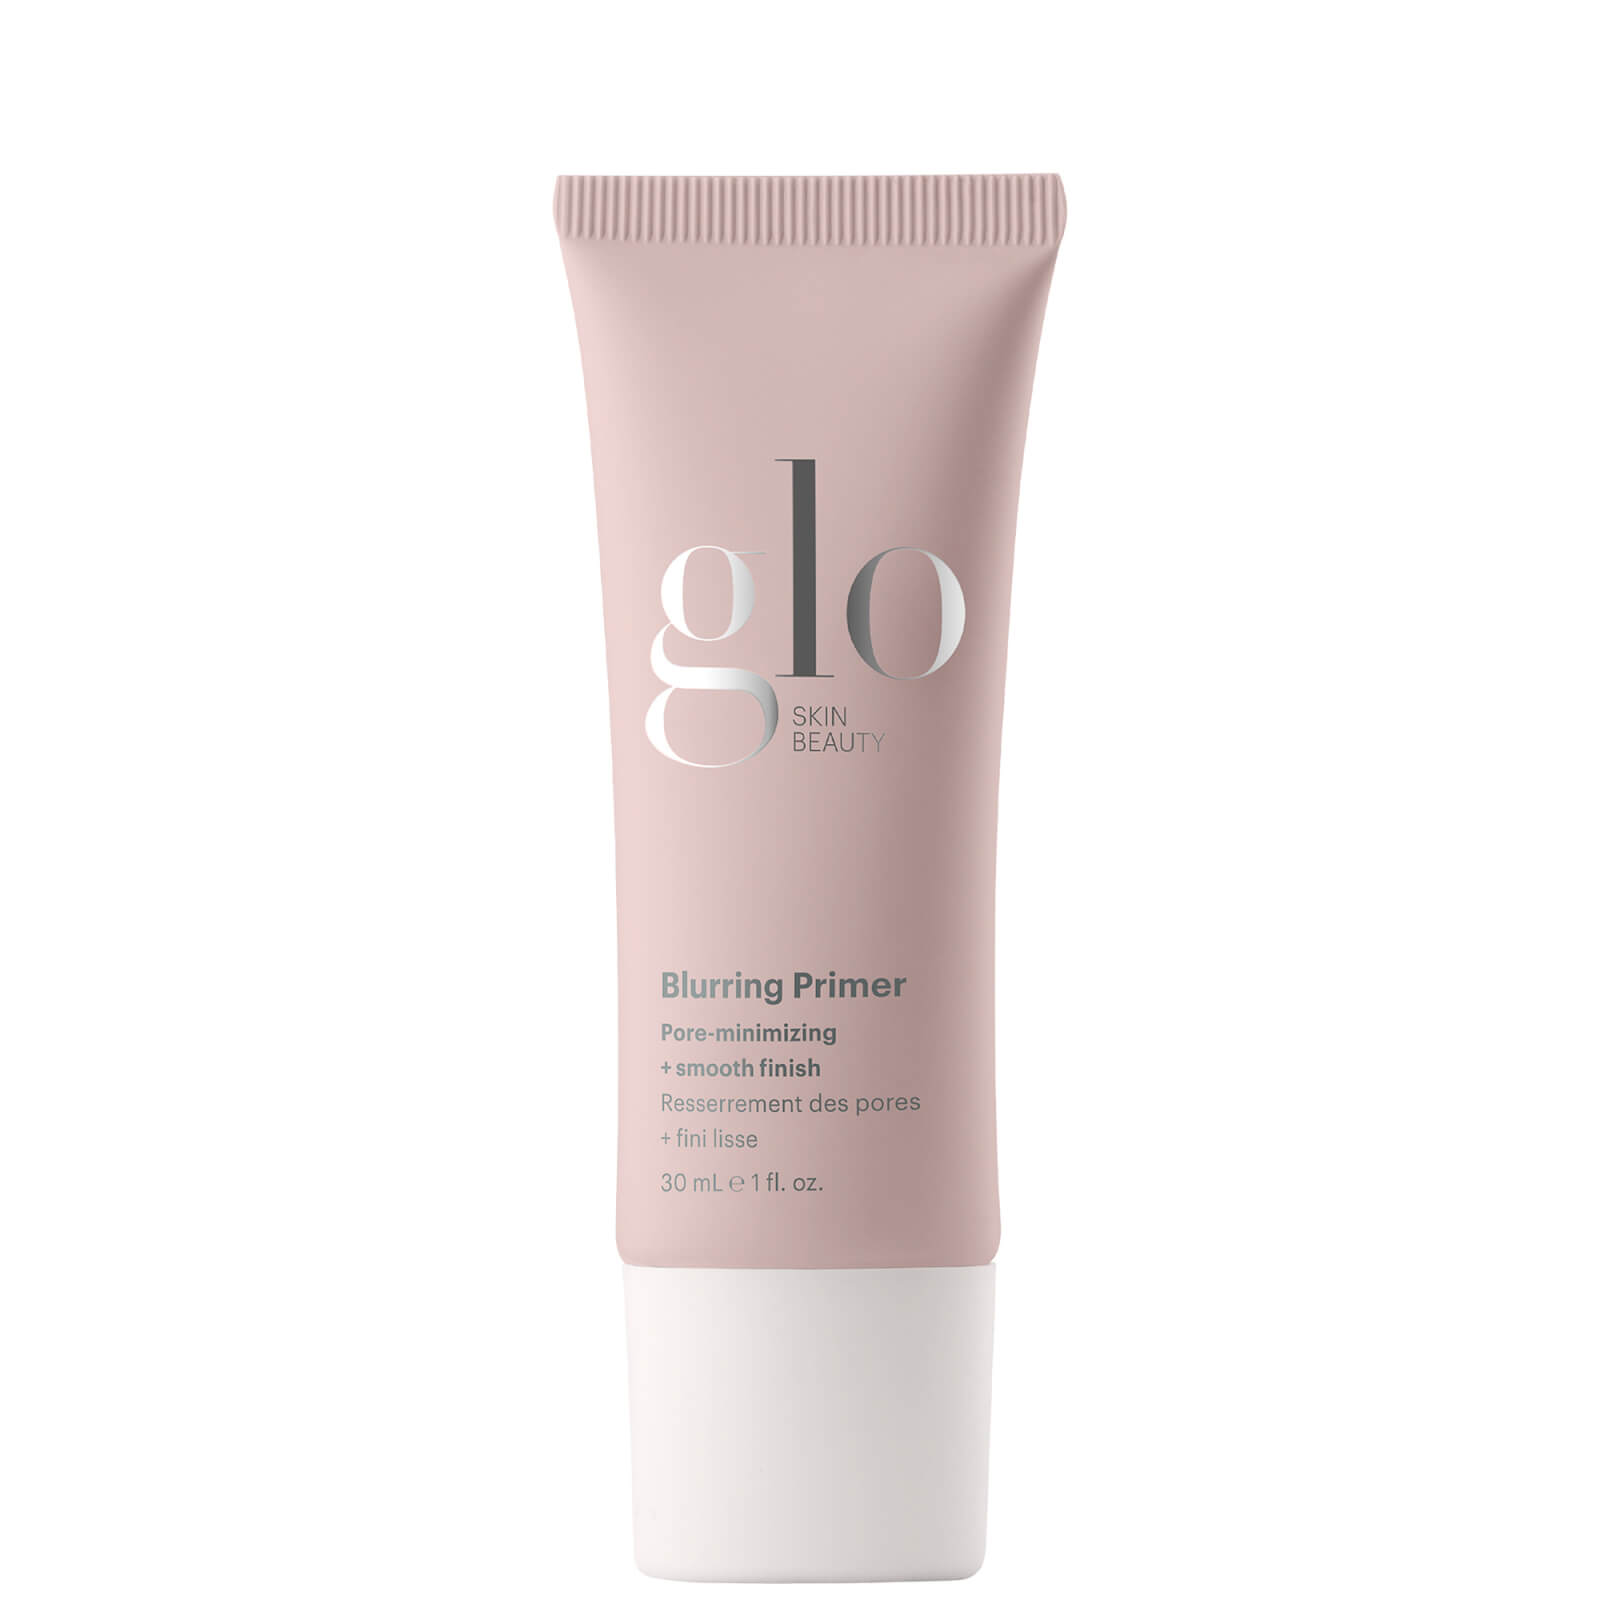 Glo Skin Beauty Blurring Makeup Primer With Ceramides To Minimizes Pores And Smooths Texture 1 Fl. oz In White